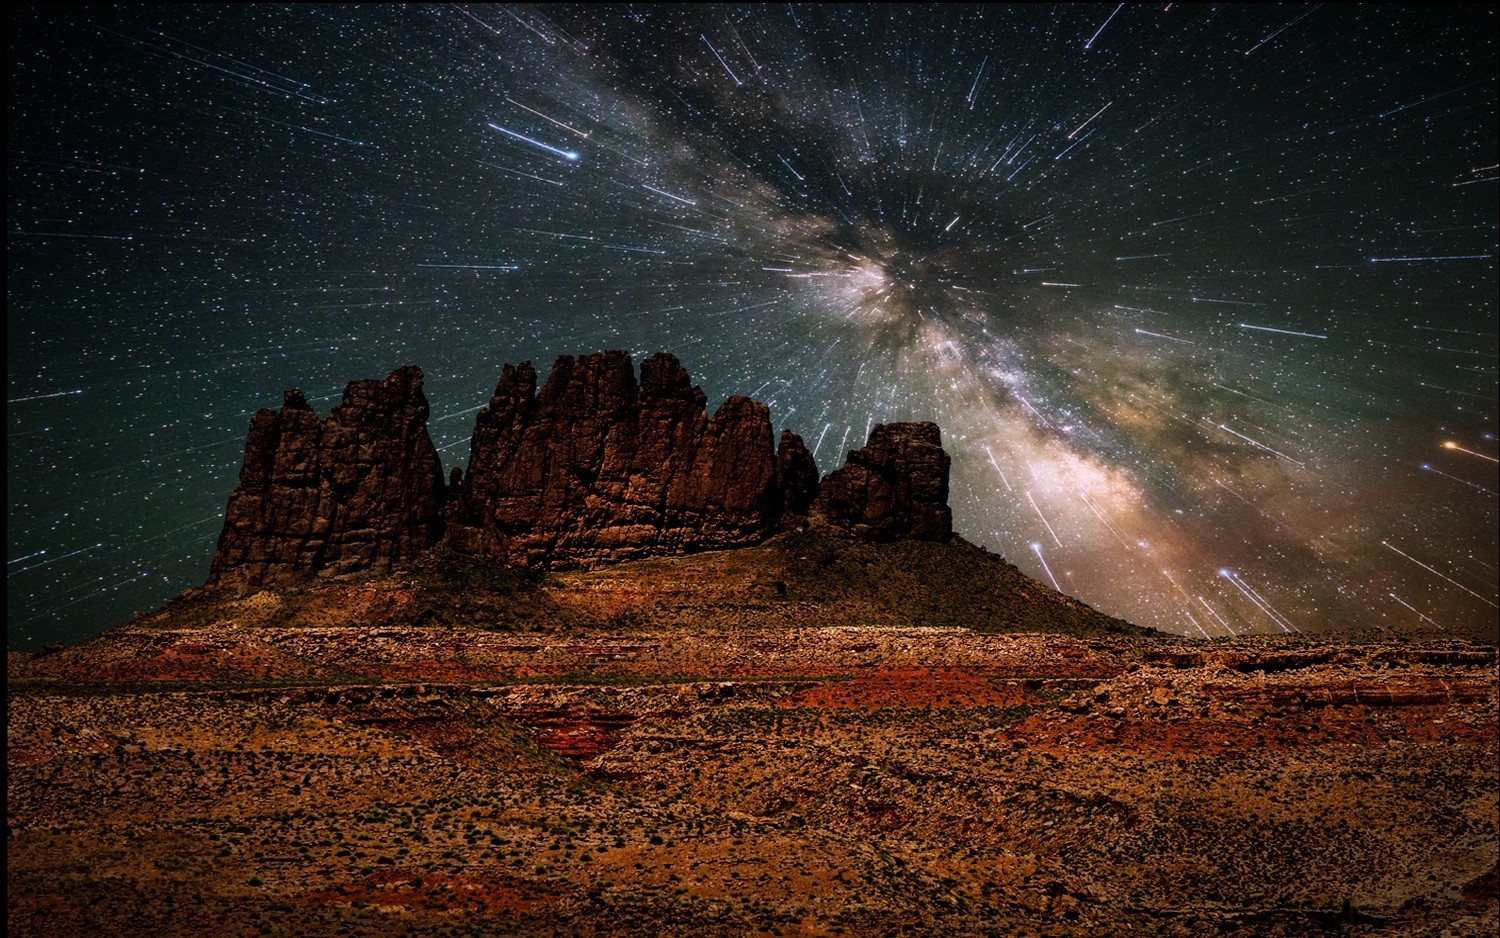 General 1500x938 nature landscape desert starry night long exposure Milky Way galaxy mountains universe space erosion